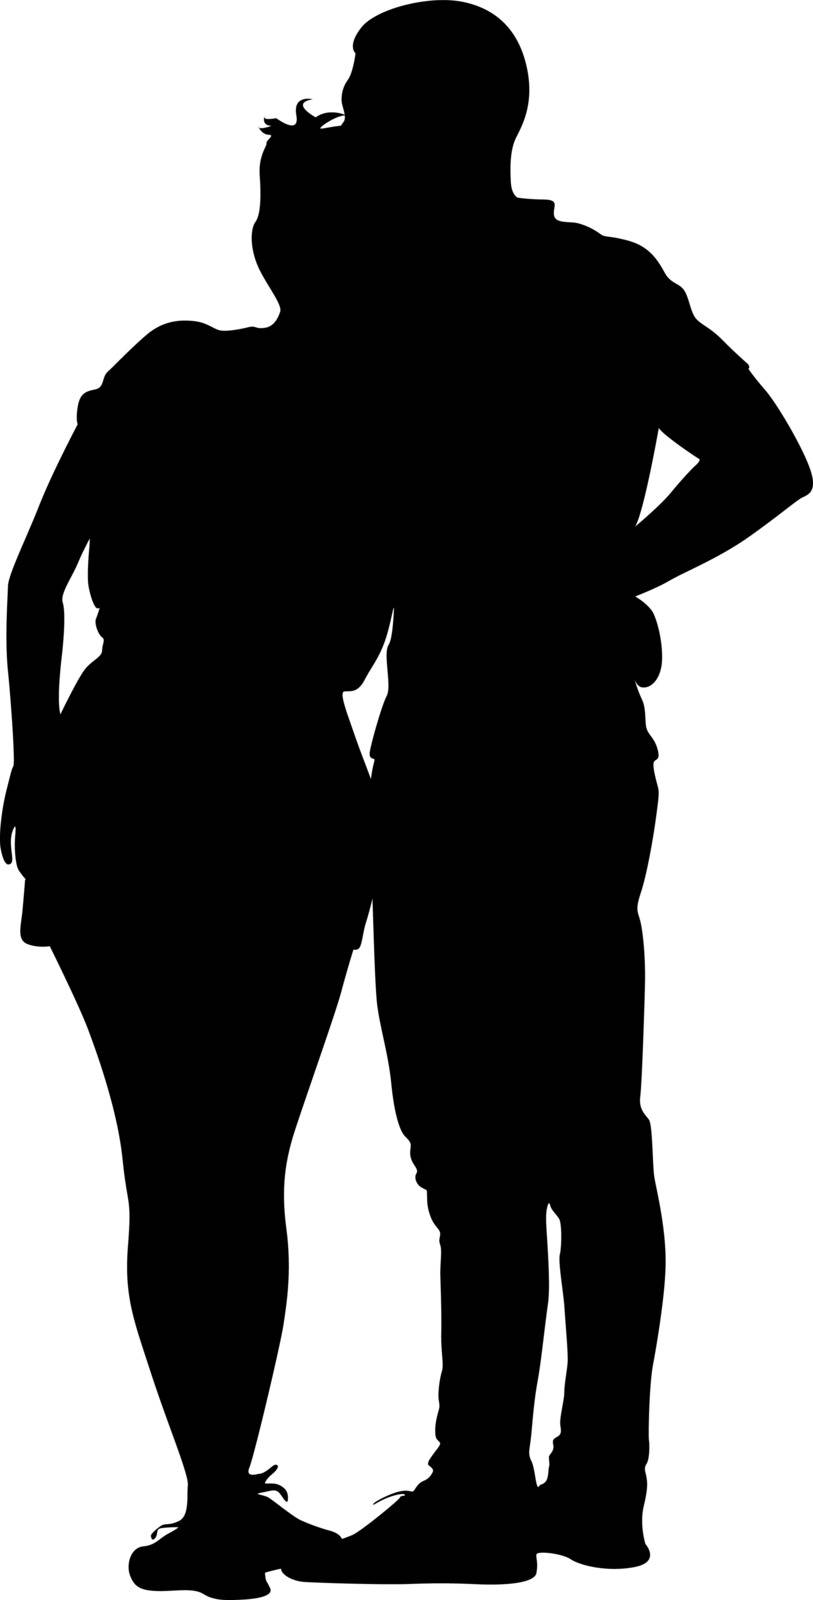 Silhouette man and woman walking hand in hand by aarrows